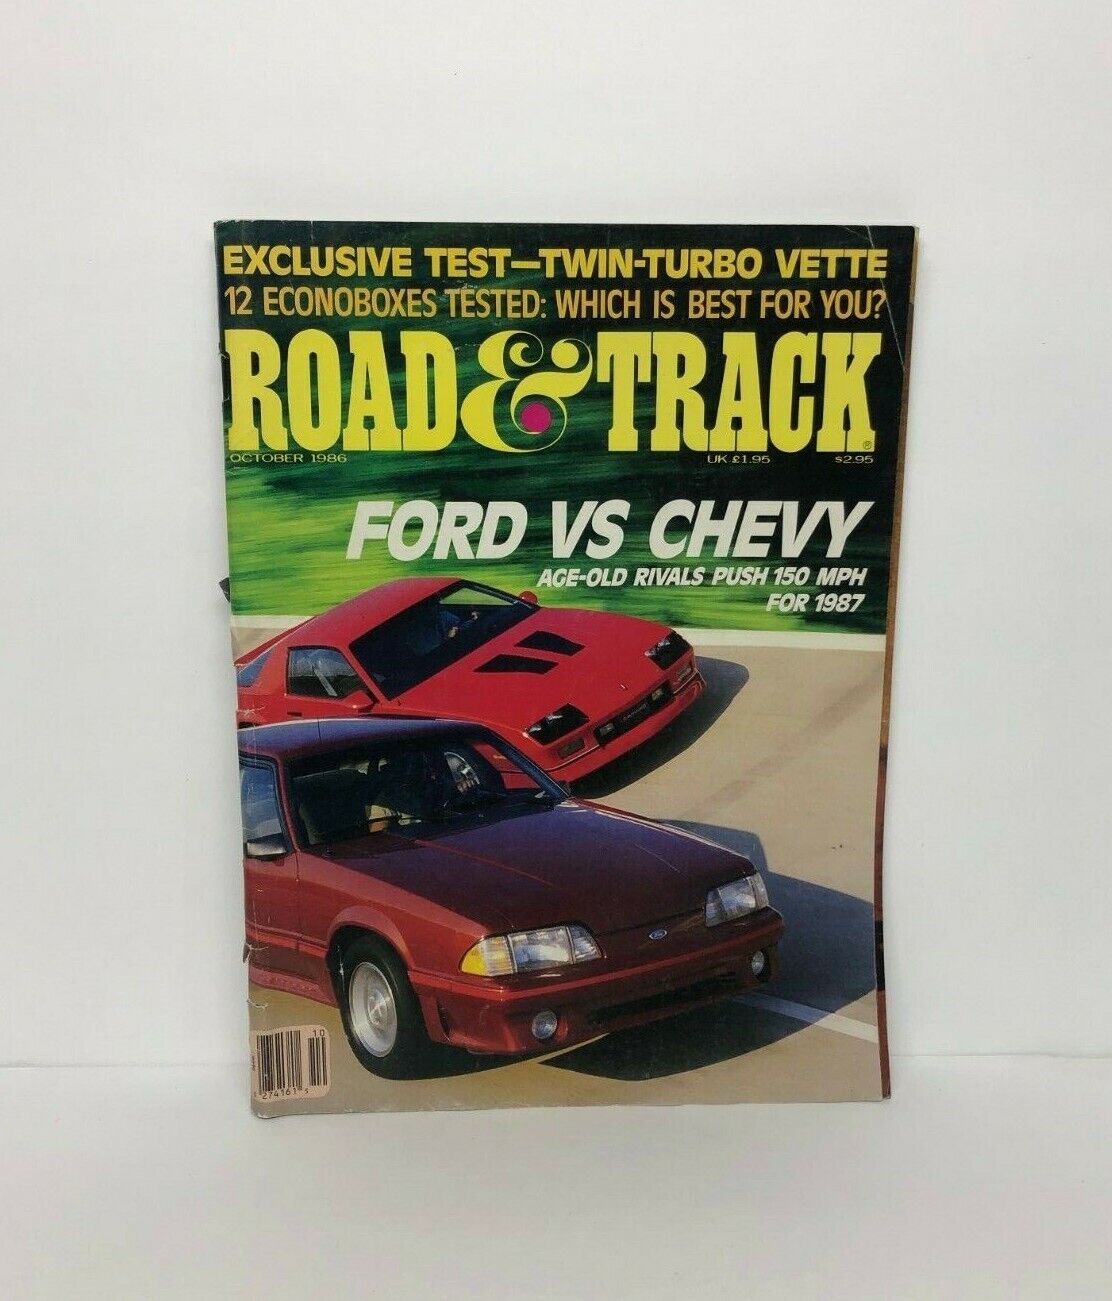 Vintage Car Magazine Road & Track October 1986 - Ford Vs Chevy Twin Turbo Vette